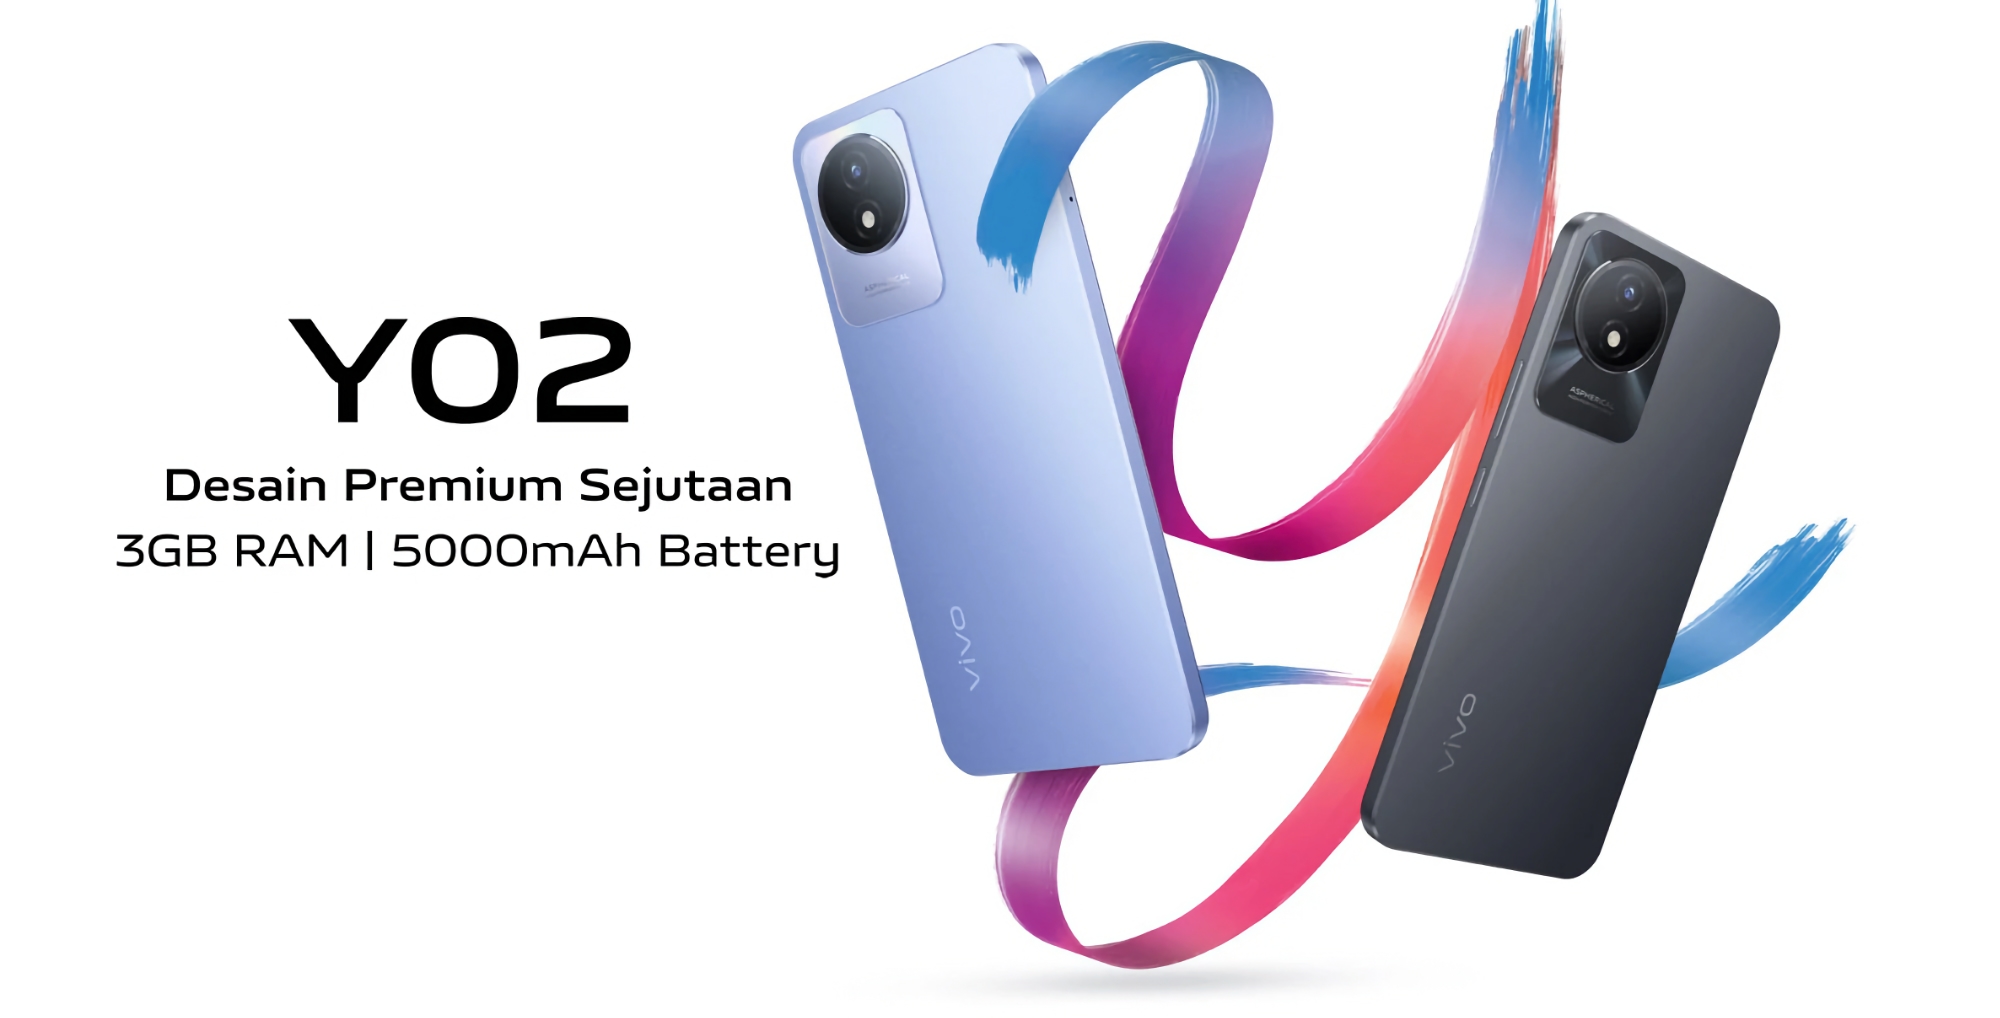 vivo Y02: 6.51" screen, 5000 mAh battery and Android 12 Go Edition for $95